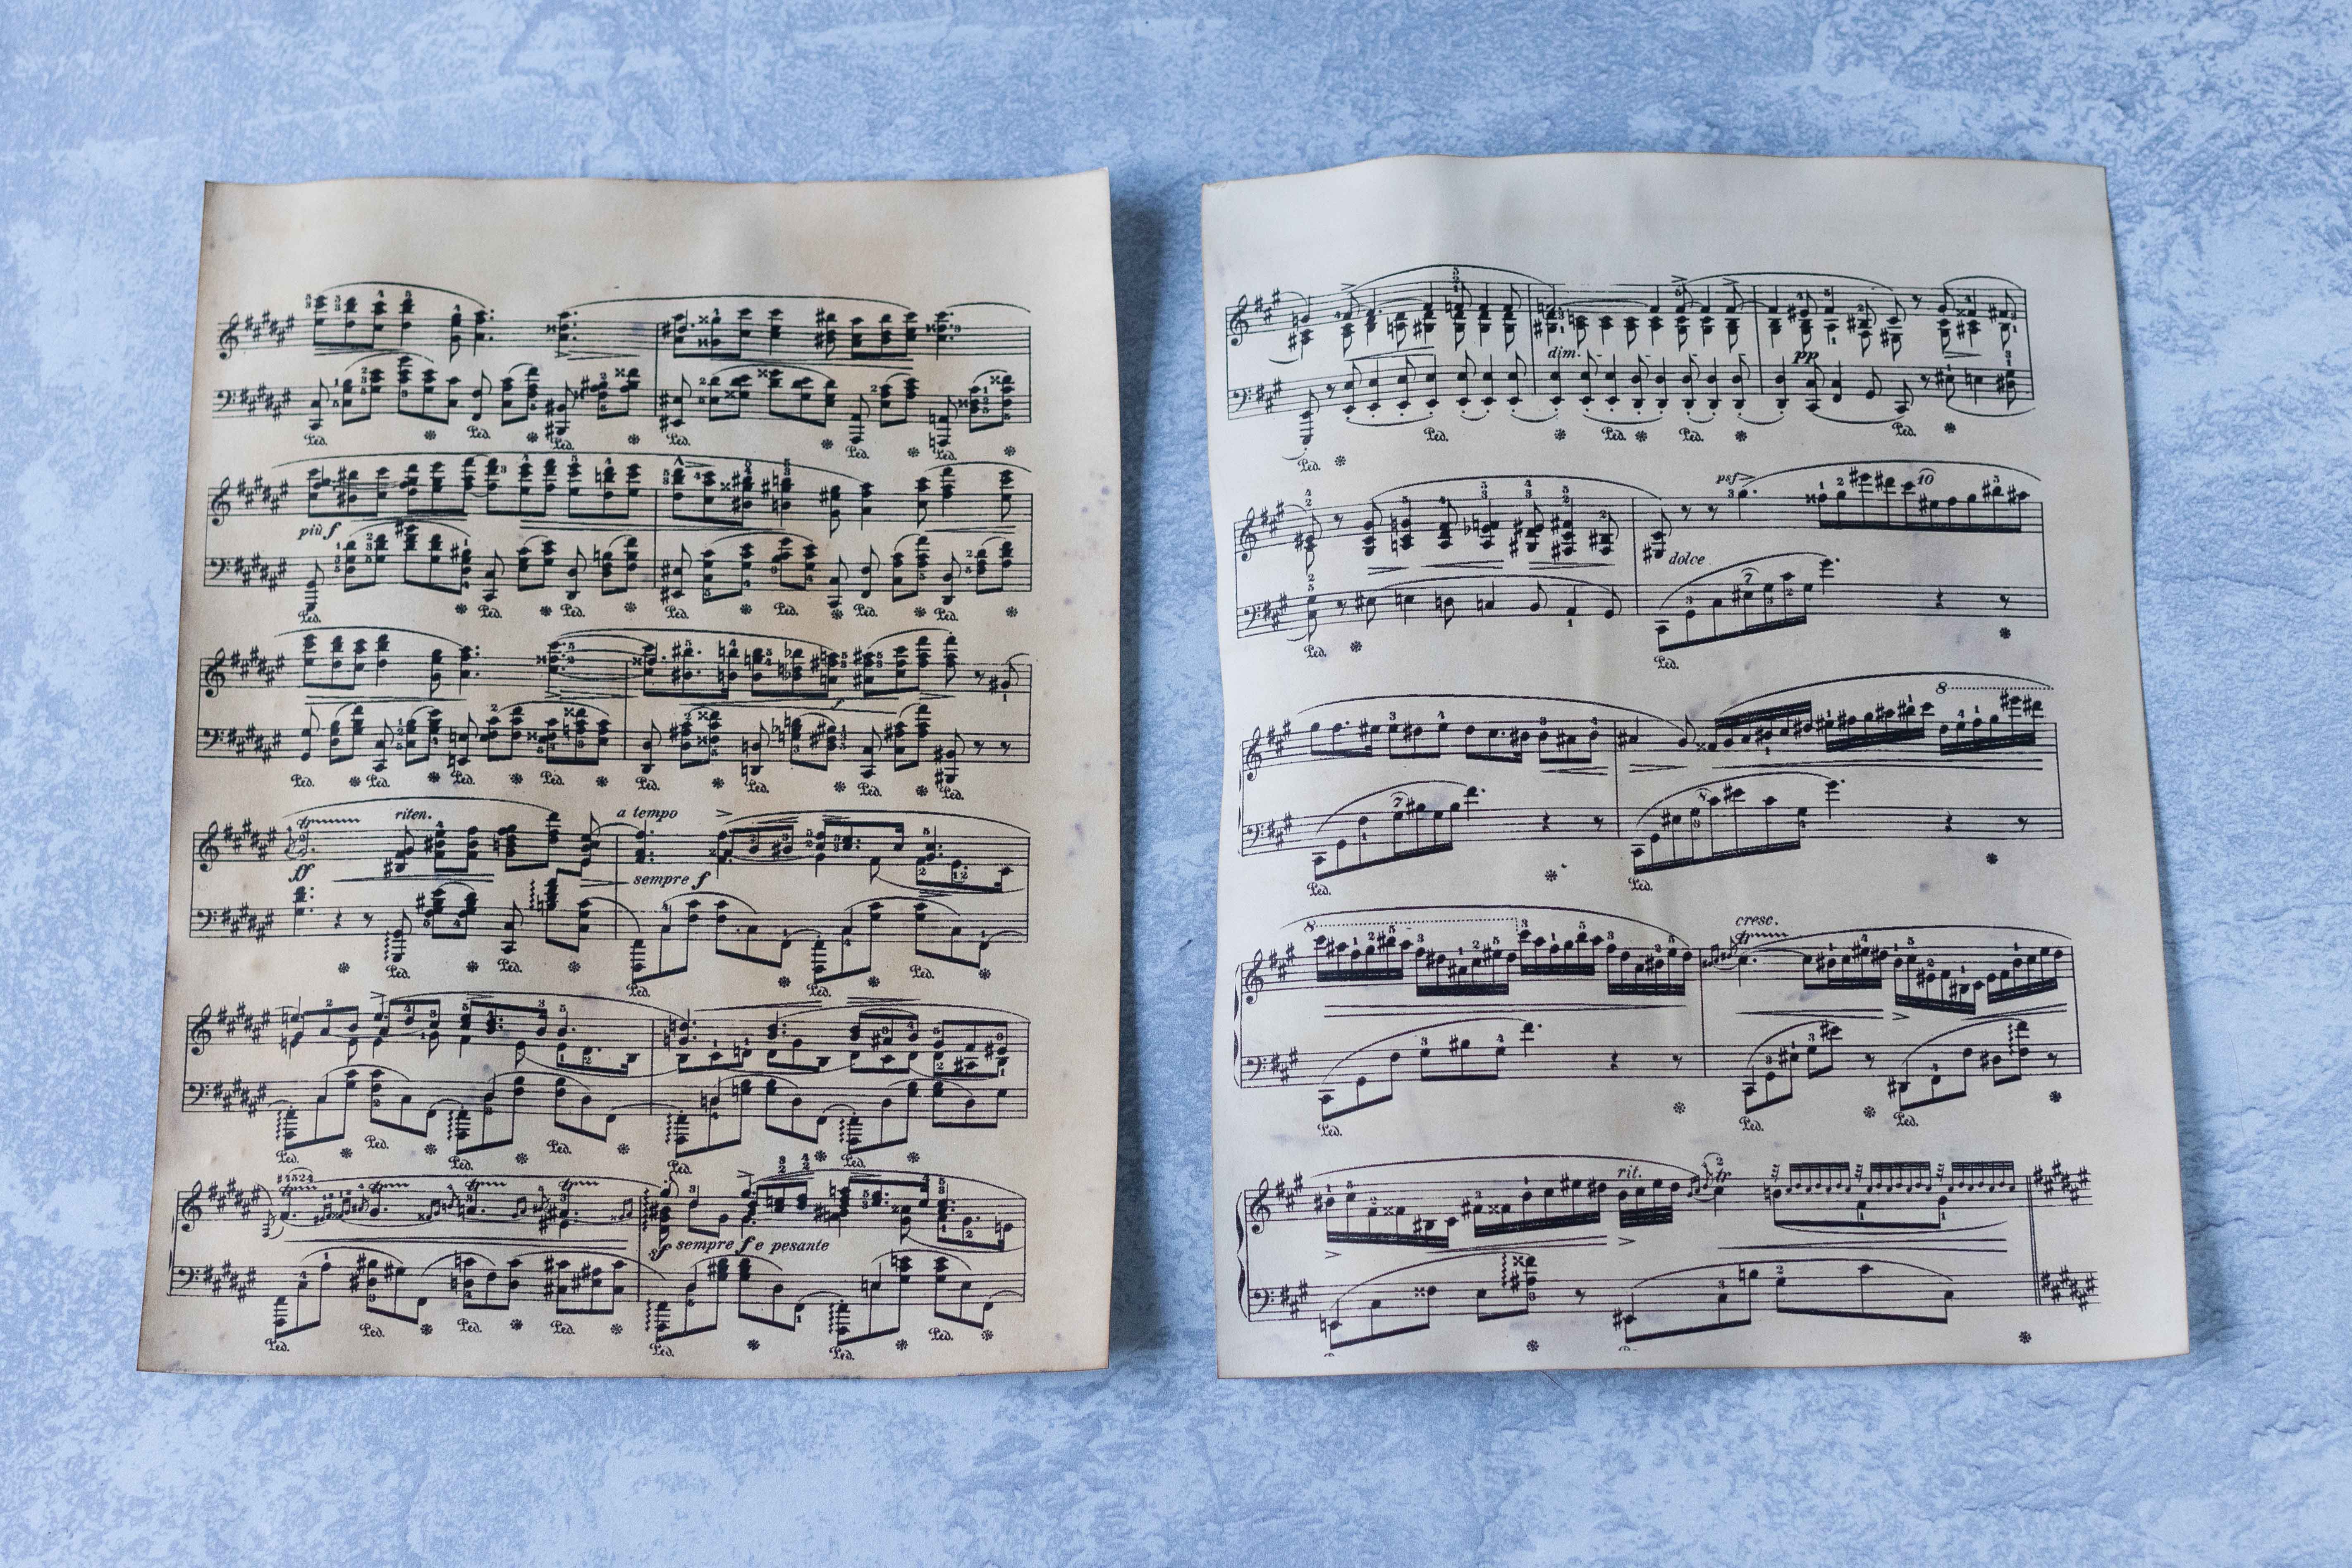 DIY antiqued sheet music, ready for homemade tile coasters. #vintagemusic #DIYproject #sheetmusiccraft | https://www.roseclearfield.com